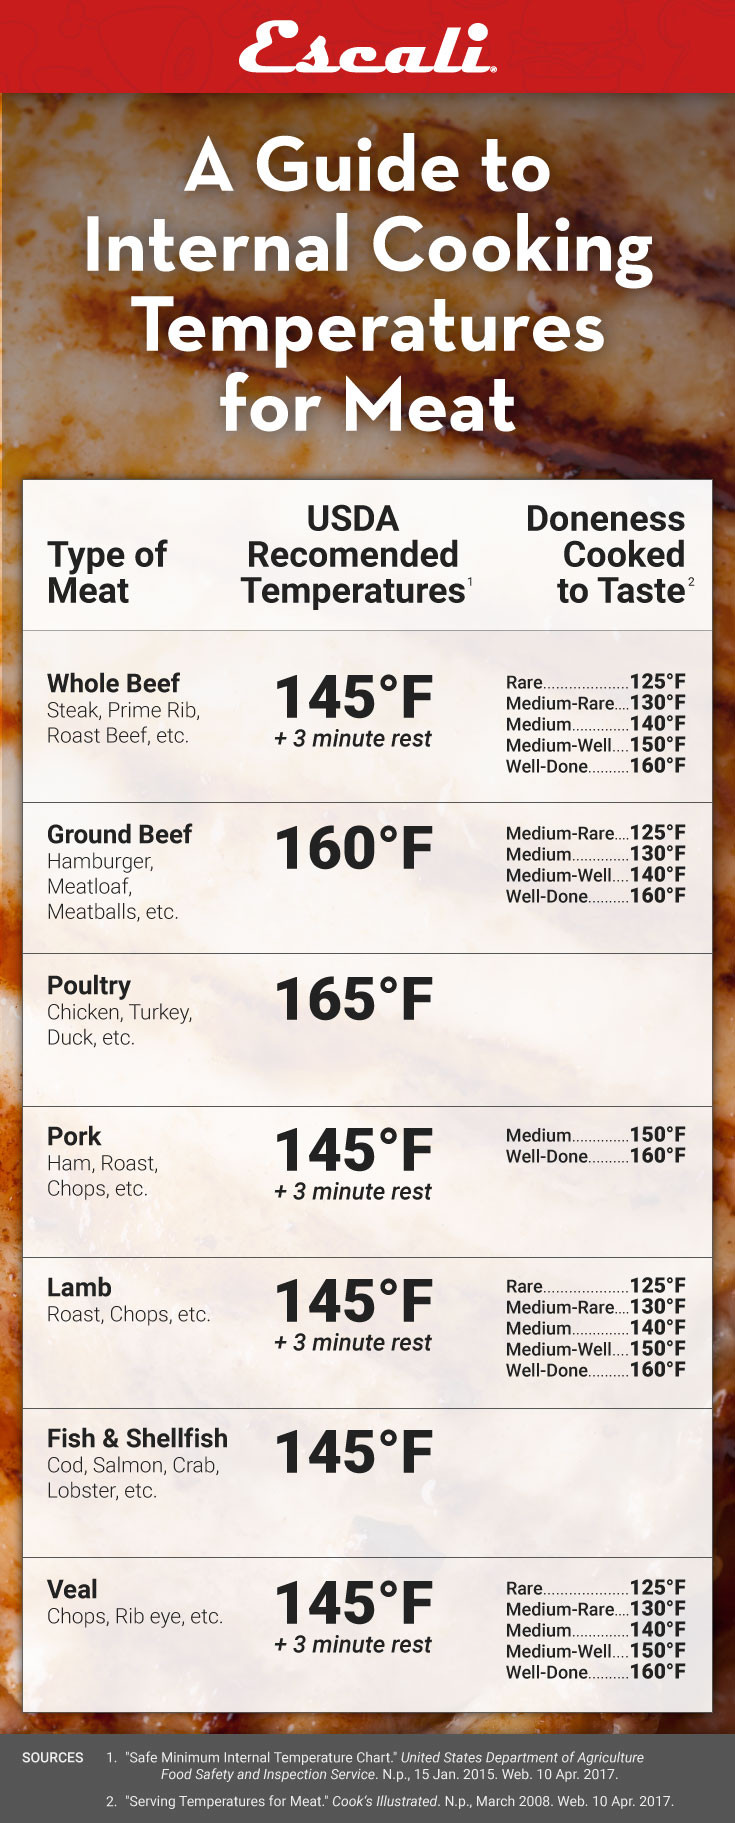 Pork Sausage Temperature
 A Guide to Internal Cooking Temperature for Meat Escali Blog